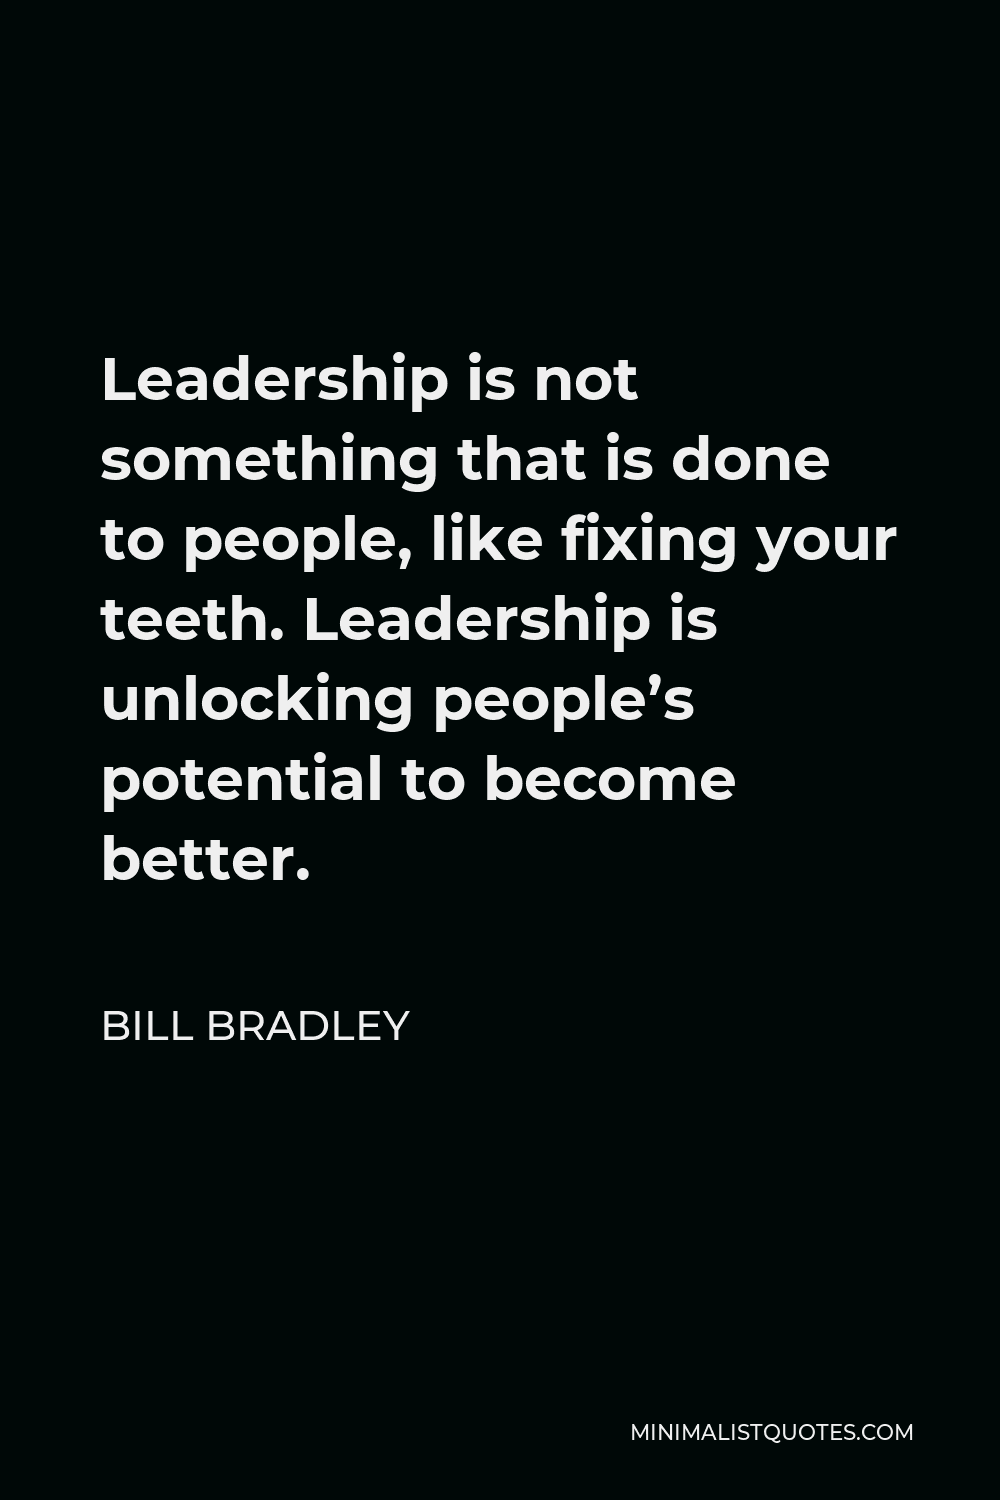 Bill Bradley Quote - Leadership is not something that is done to people, like fixing your teeth. Leadership is unlocking people’s potential to become better.